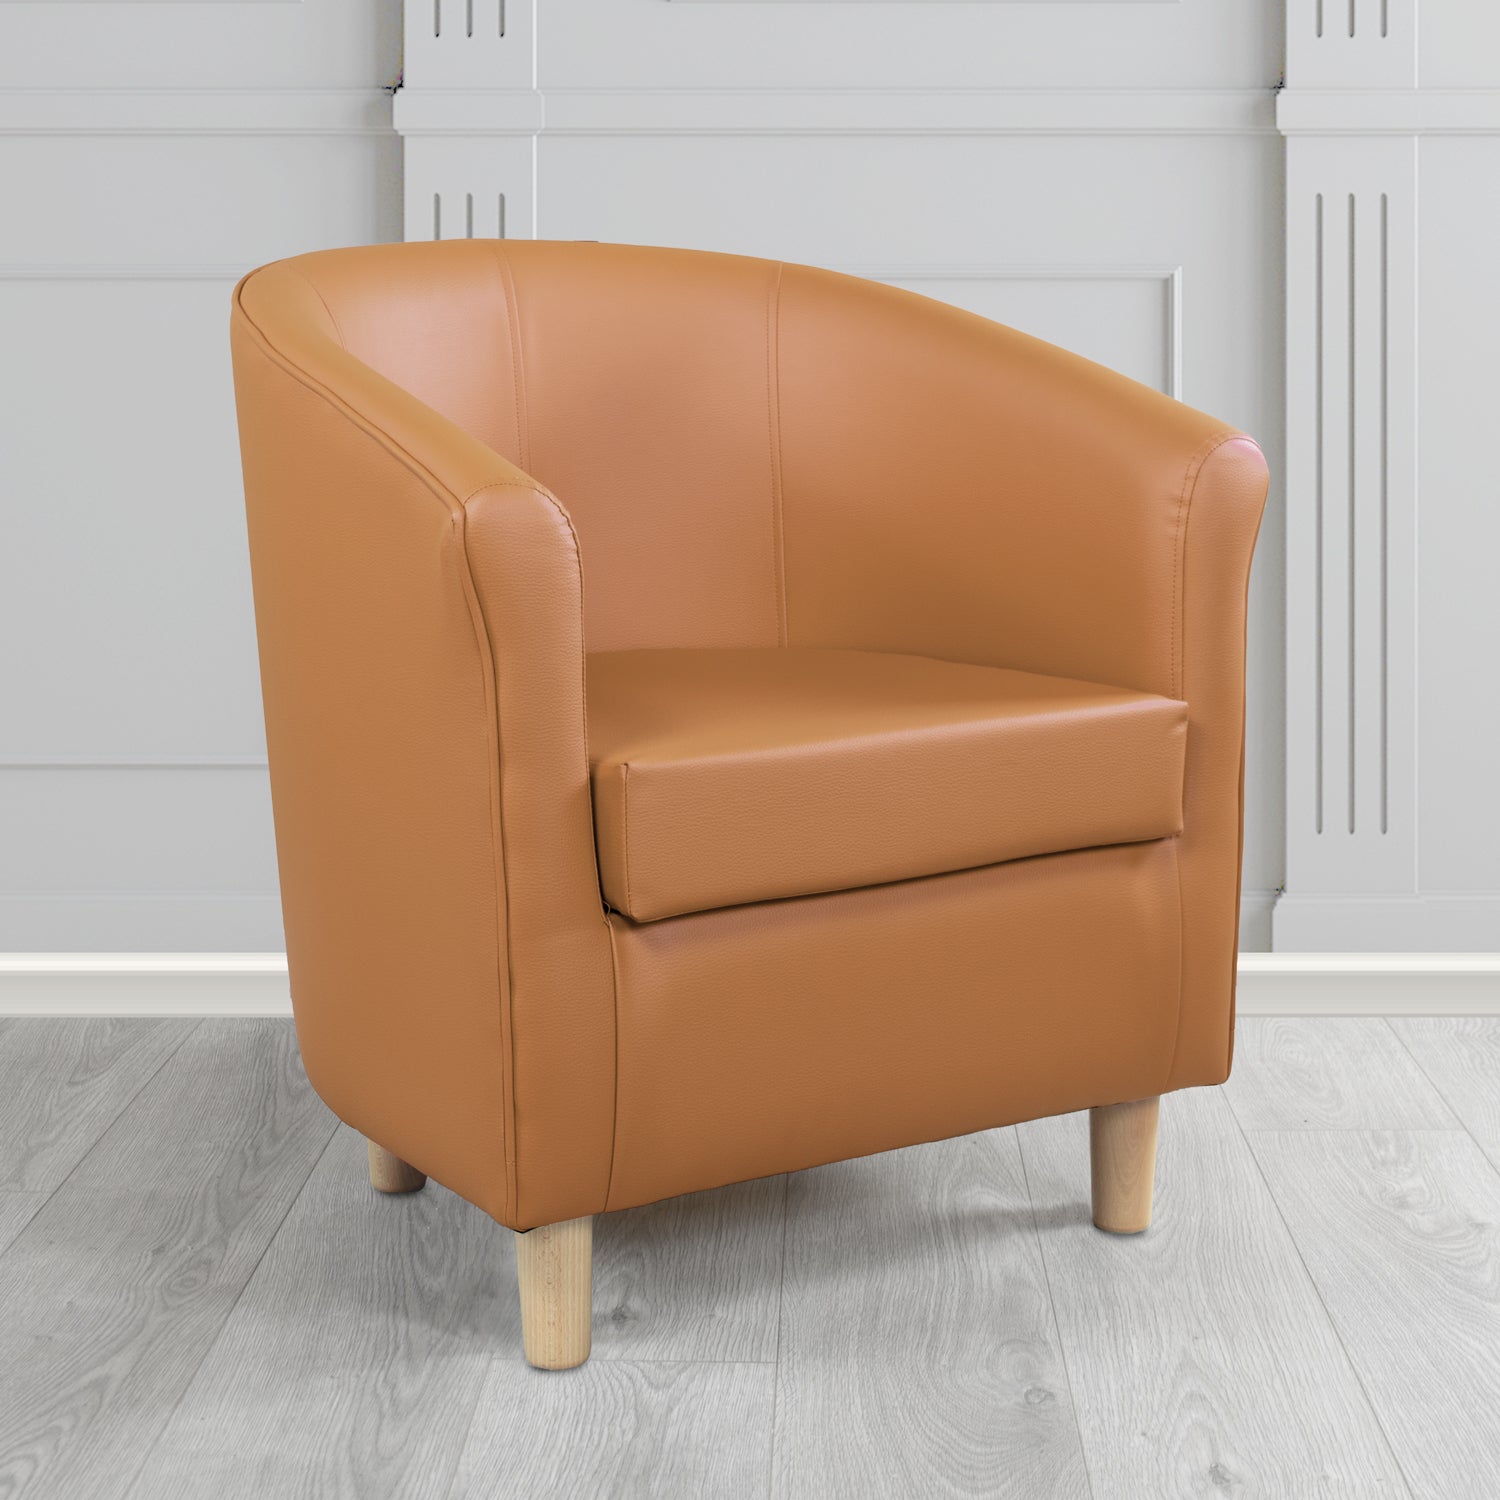 Tuscany Just Colour Fudge Antimicrobial Crib 5 Contract Faux Leather Tub Chair - The Tub Chair Shop